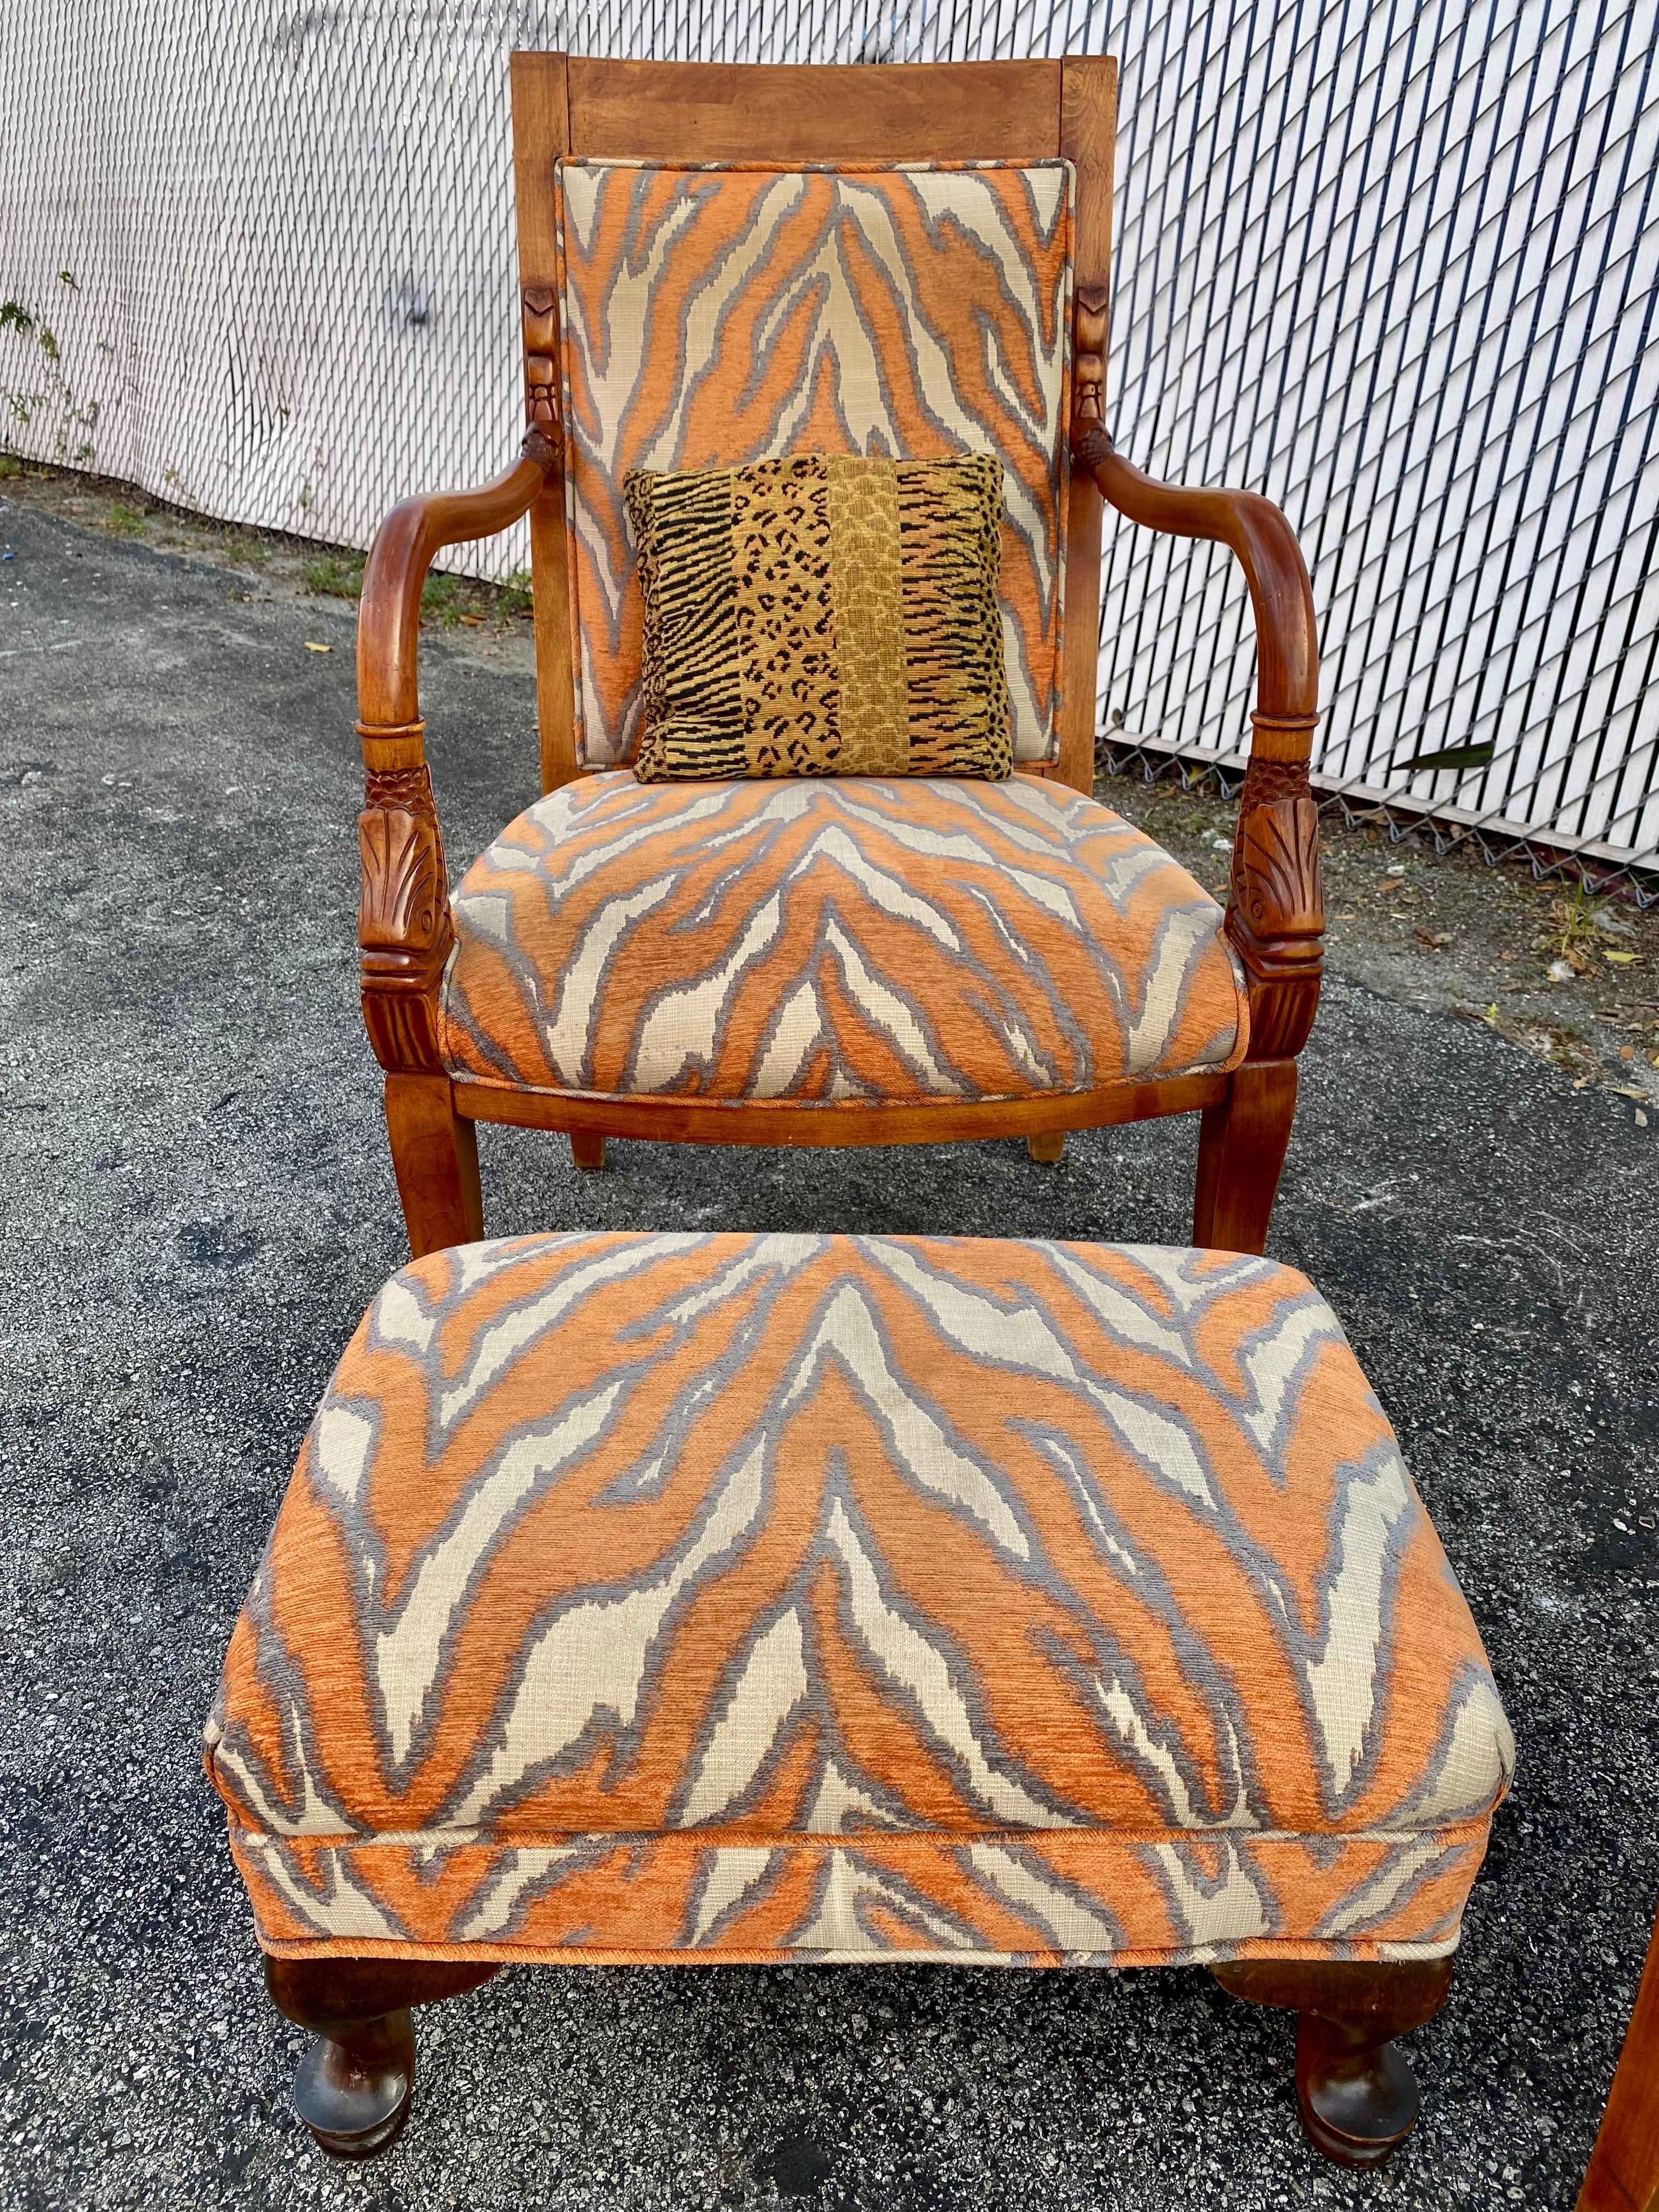 1970s Carved Wood Gold Fish Zebra Bentwood Chairs and Ottoman, Set of 3 For Sale 3